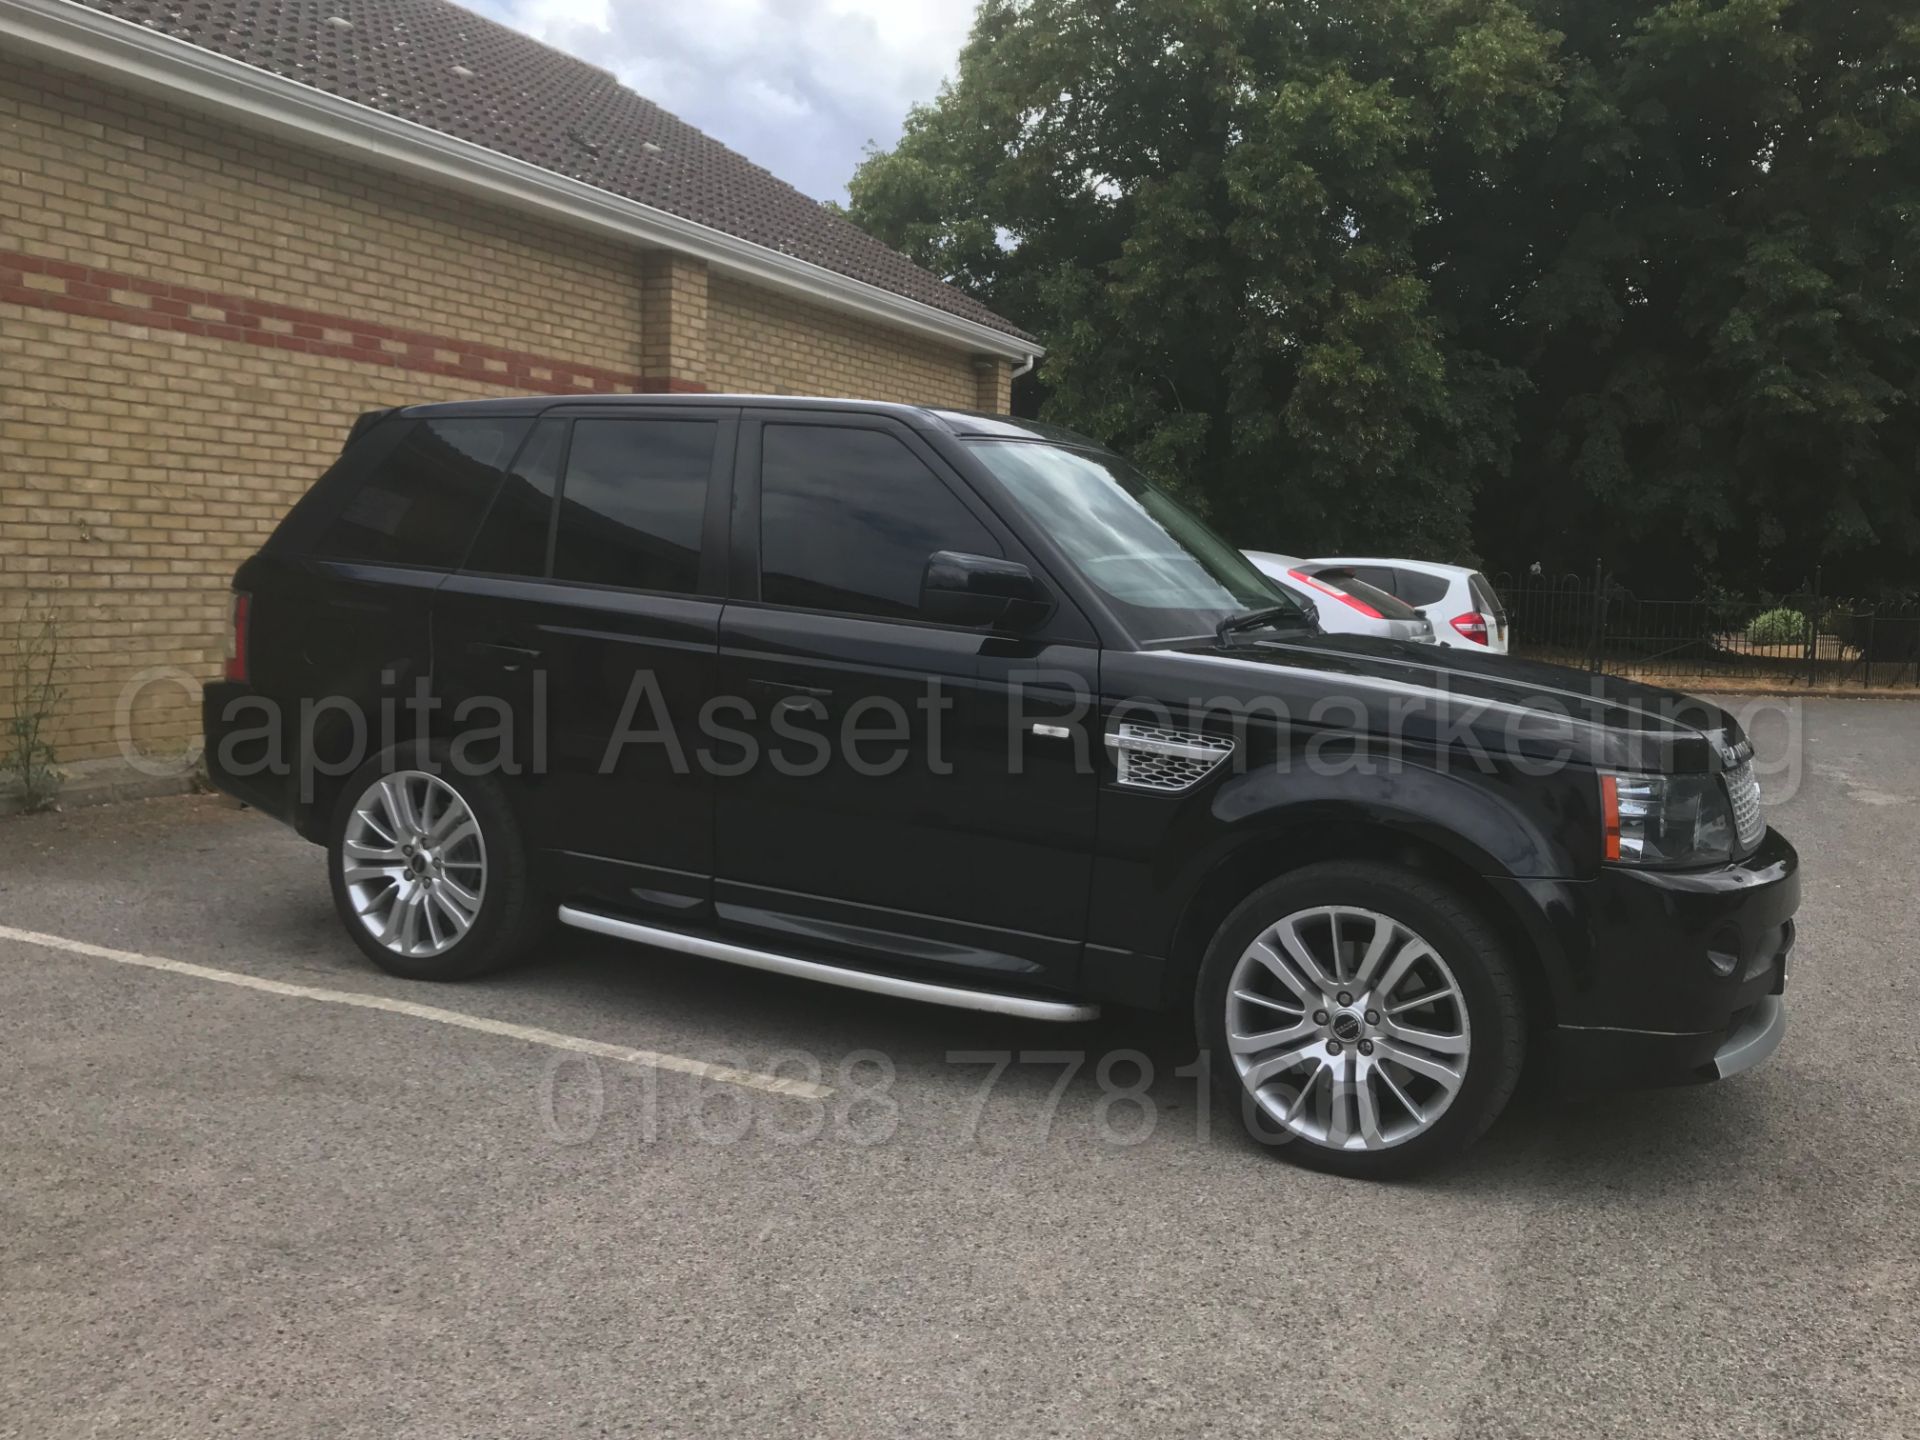 (On Sale) RANGE ROVER SPORT *HSE EDITION* (2010 MODEL) '3.0 TDV6 - 245 BHP - AUTO' **FULLY LOADED** - Image 12 of 44